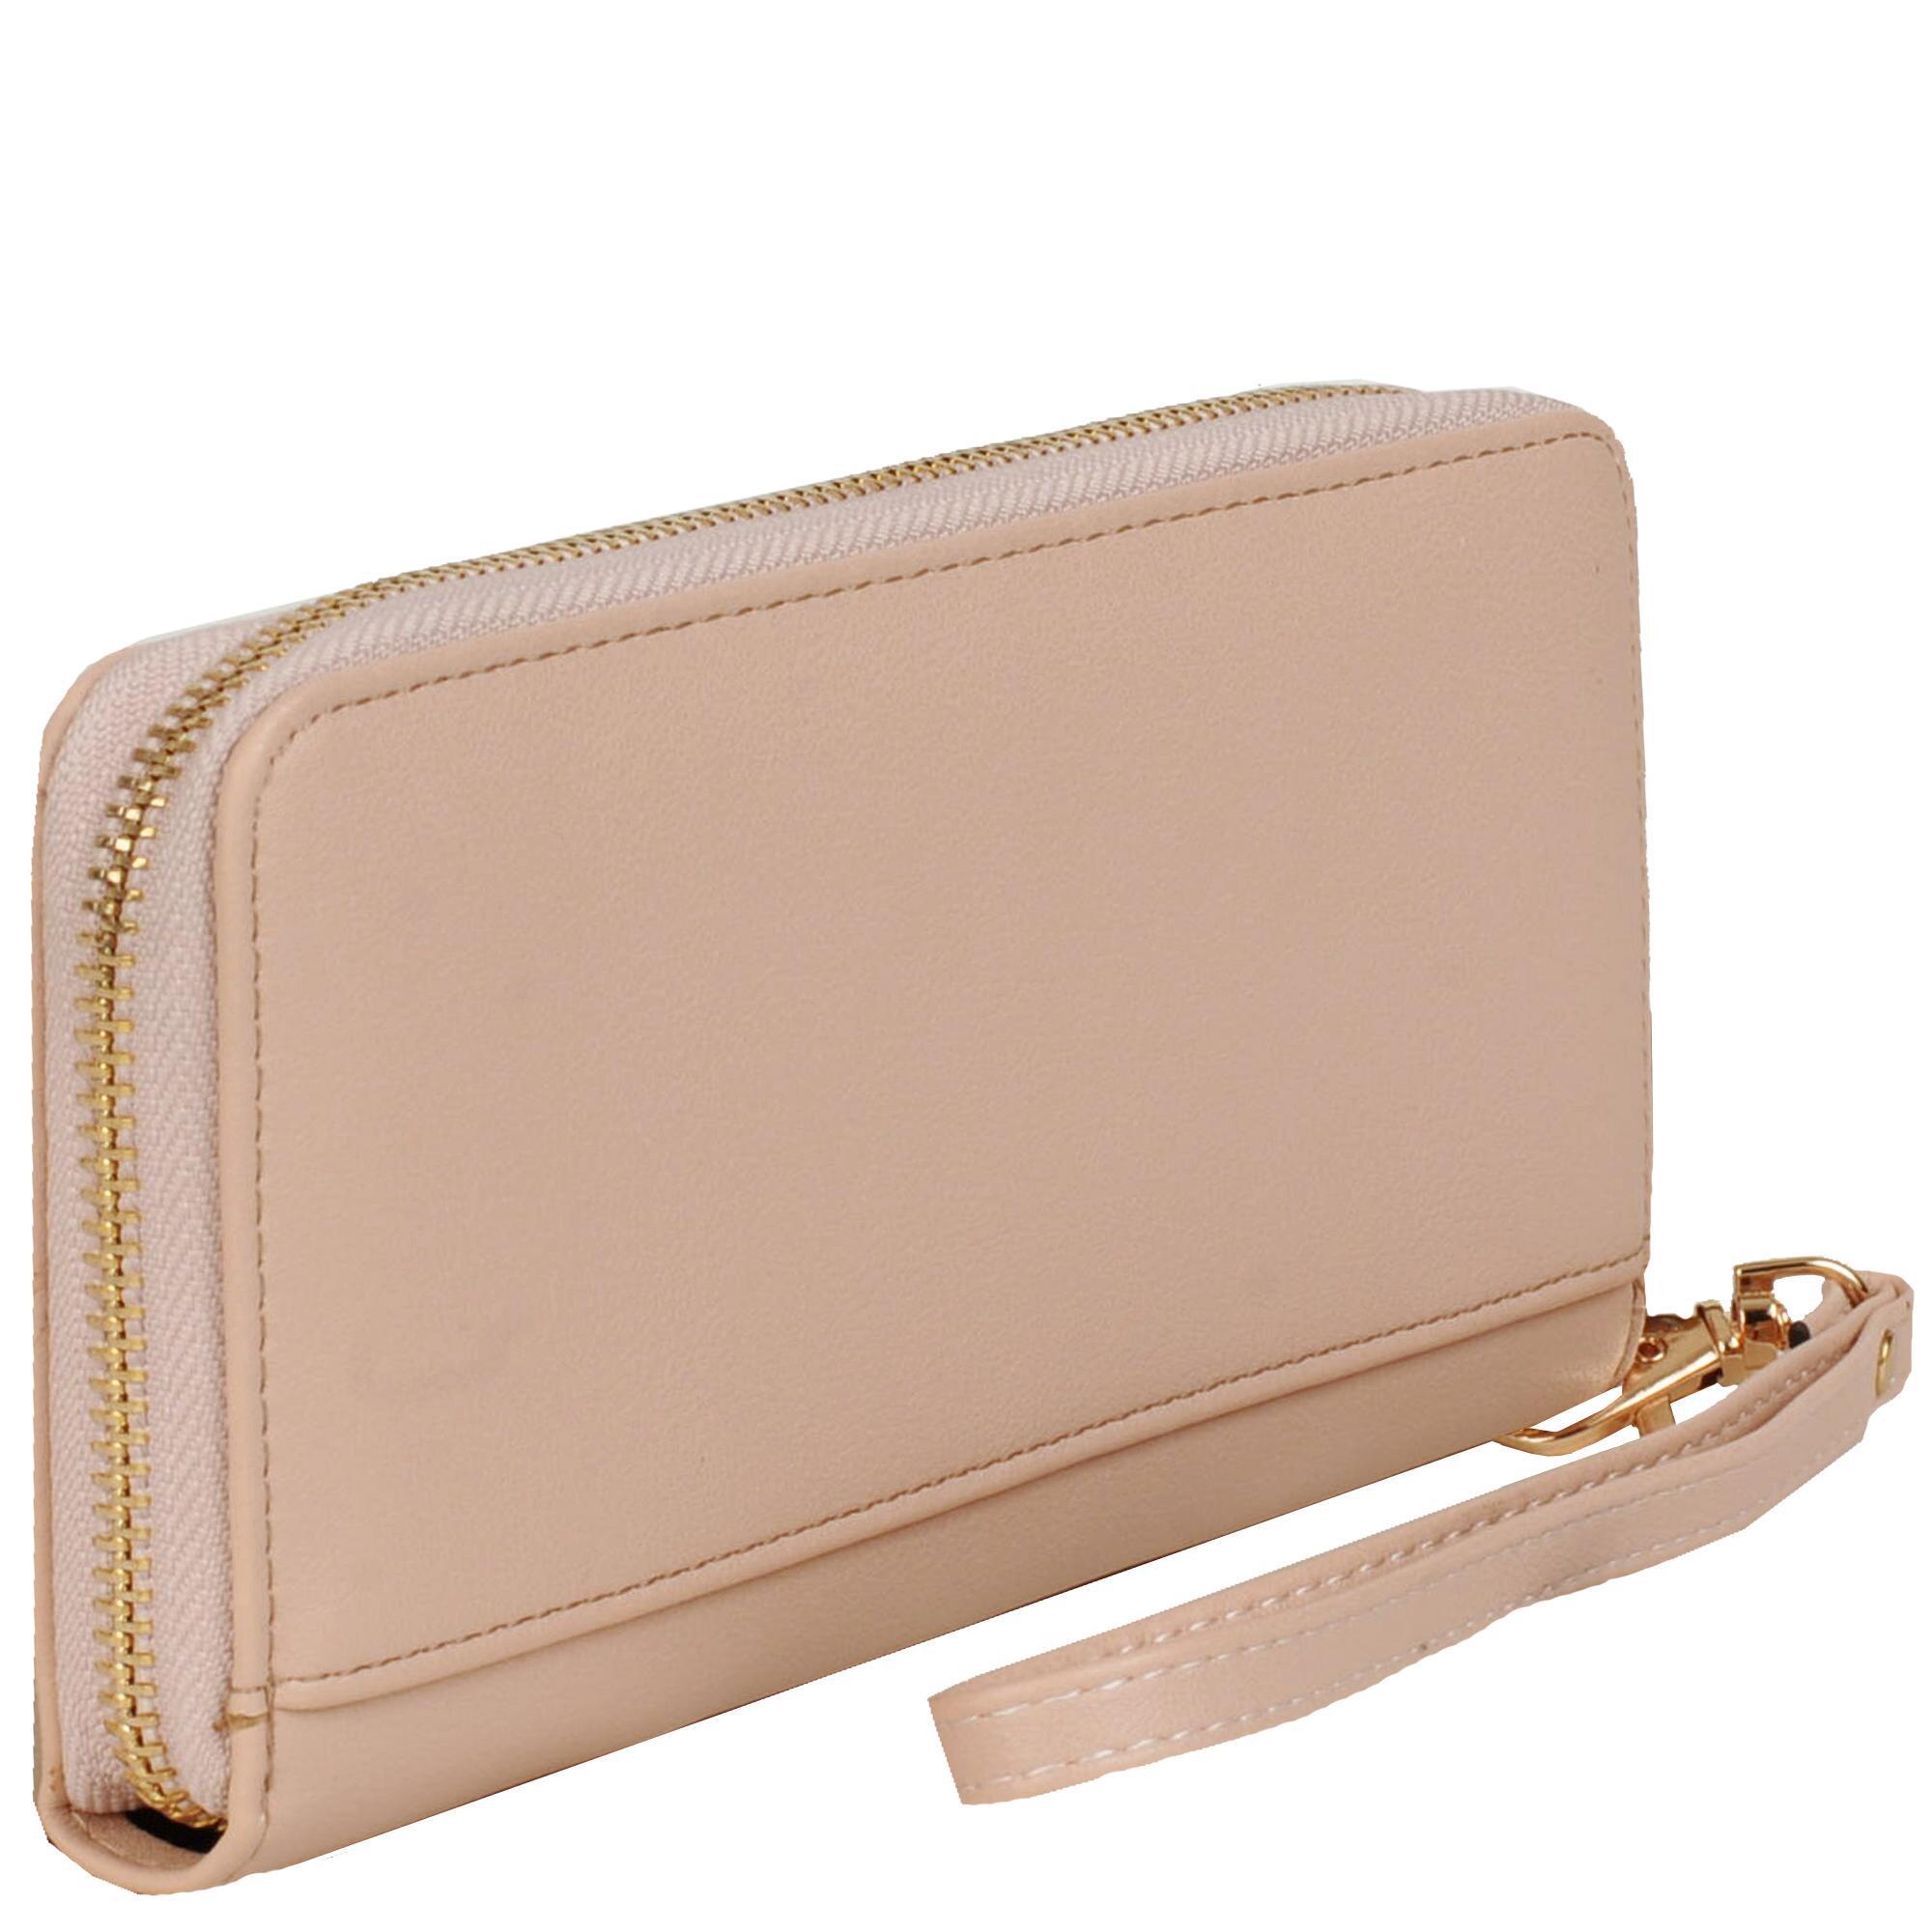 Lyst - Wilsons Leather Marc New York Zip Around Faux-leather Wristlet Wallet